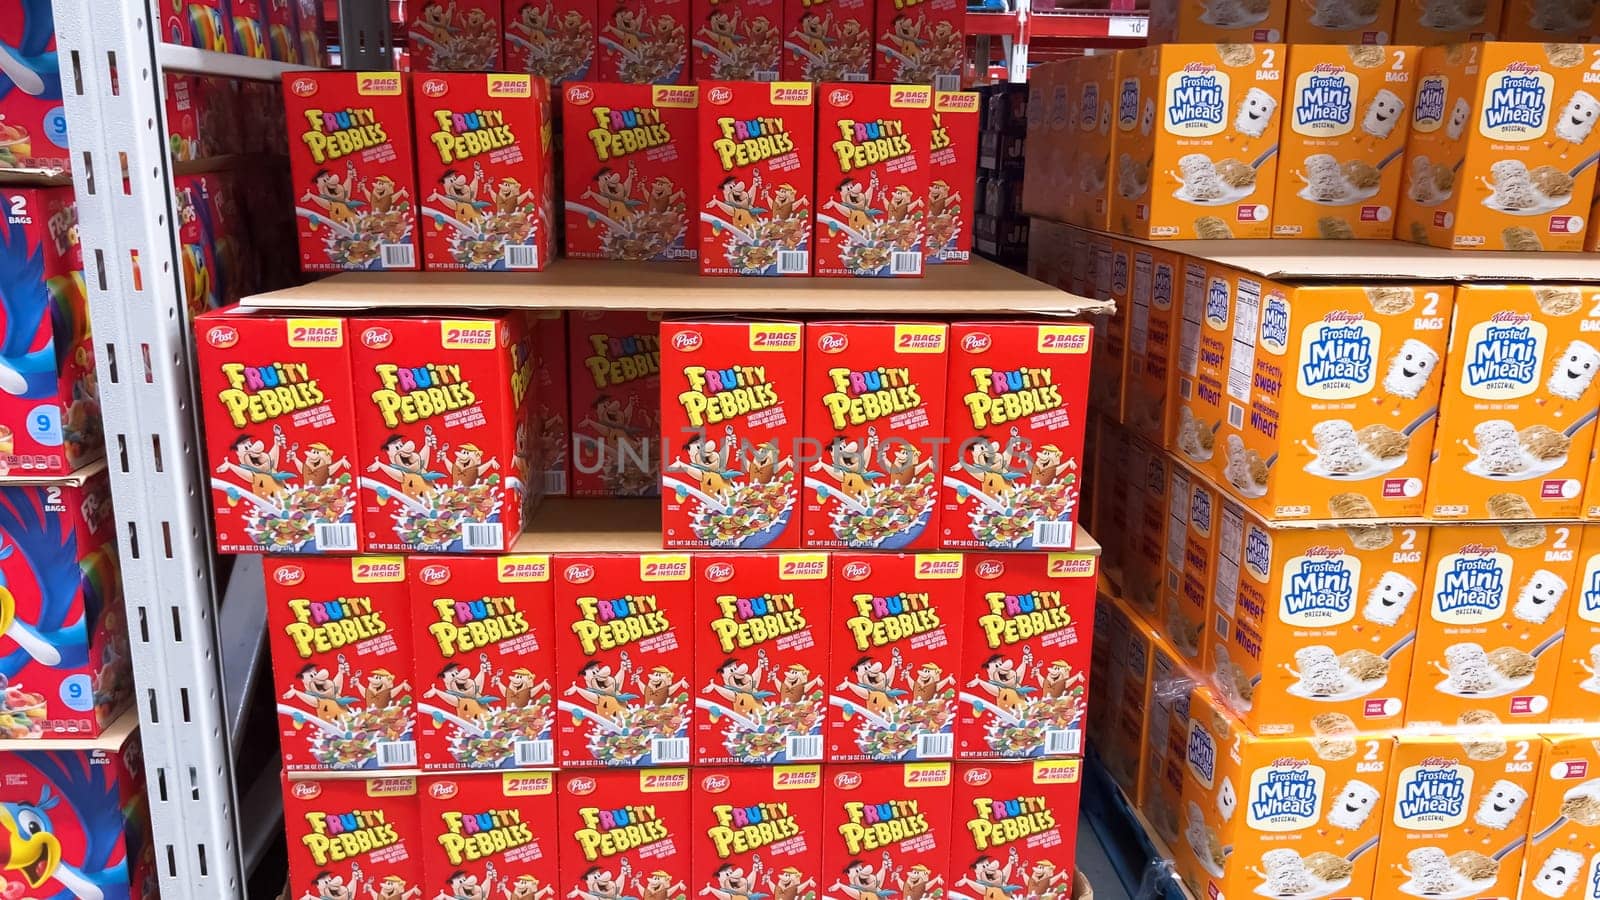 Colorful Array of Fruity Pebbles Cereal Boxes on Supermarket Shelf by arinahabich